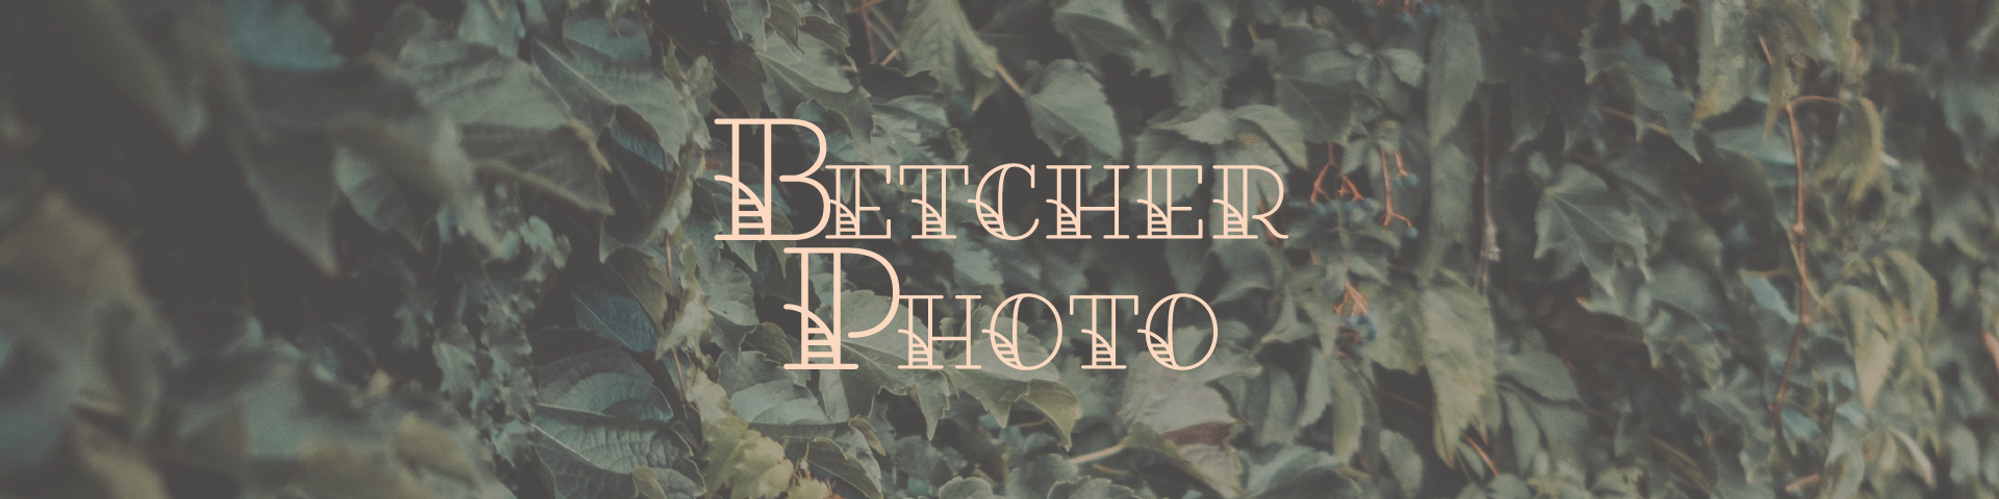 This classic looking Betcher Photo banner logo has light pink script against a background of green ivy.  Betcher Photo is a wedding photography company based out of Milwaukee, Wisconsin, serving the midwest and beyond.